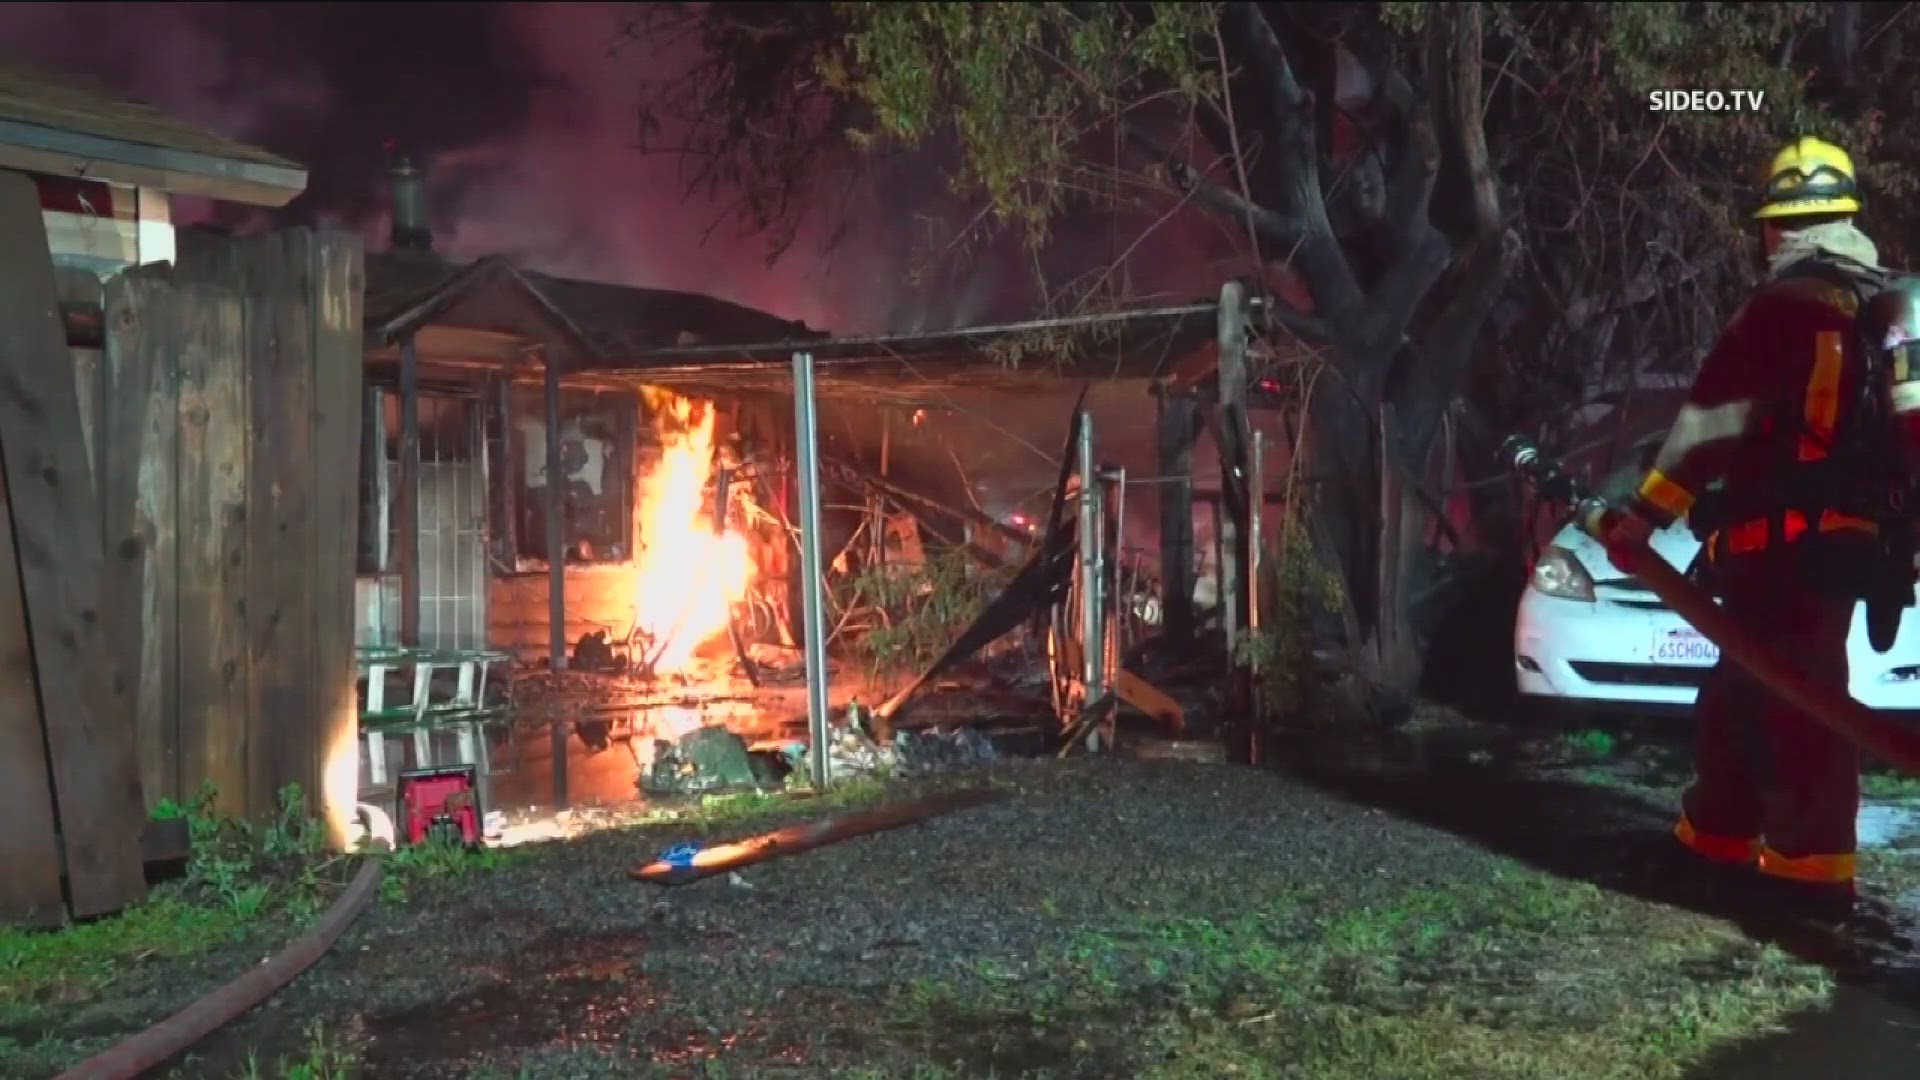 Three people are dead, and one more is injured after a fire ripped through a home in El Cajon late Thursday night.